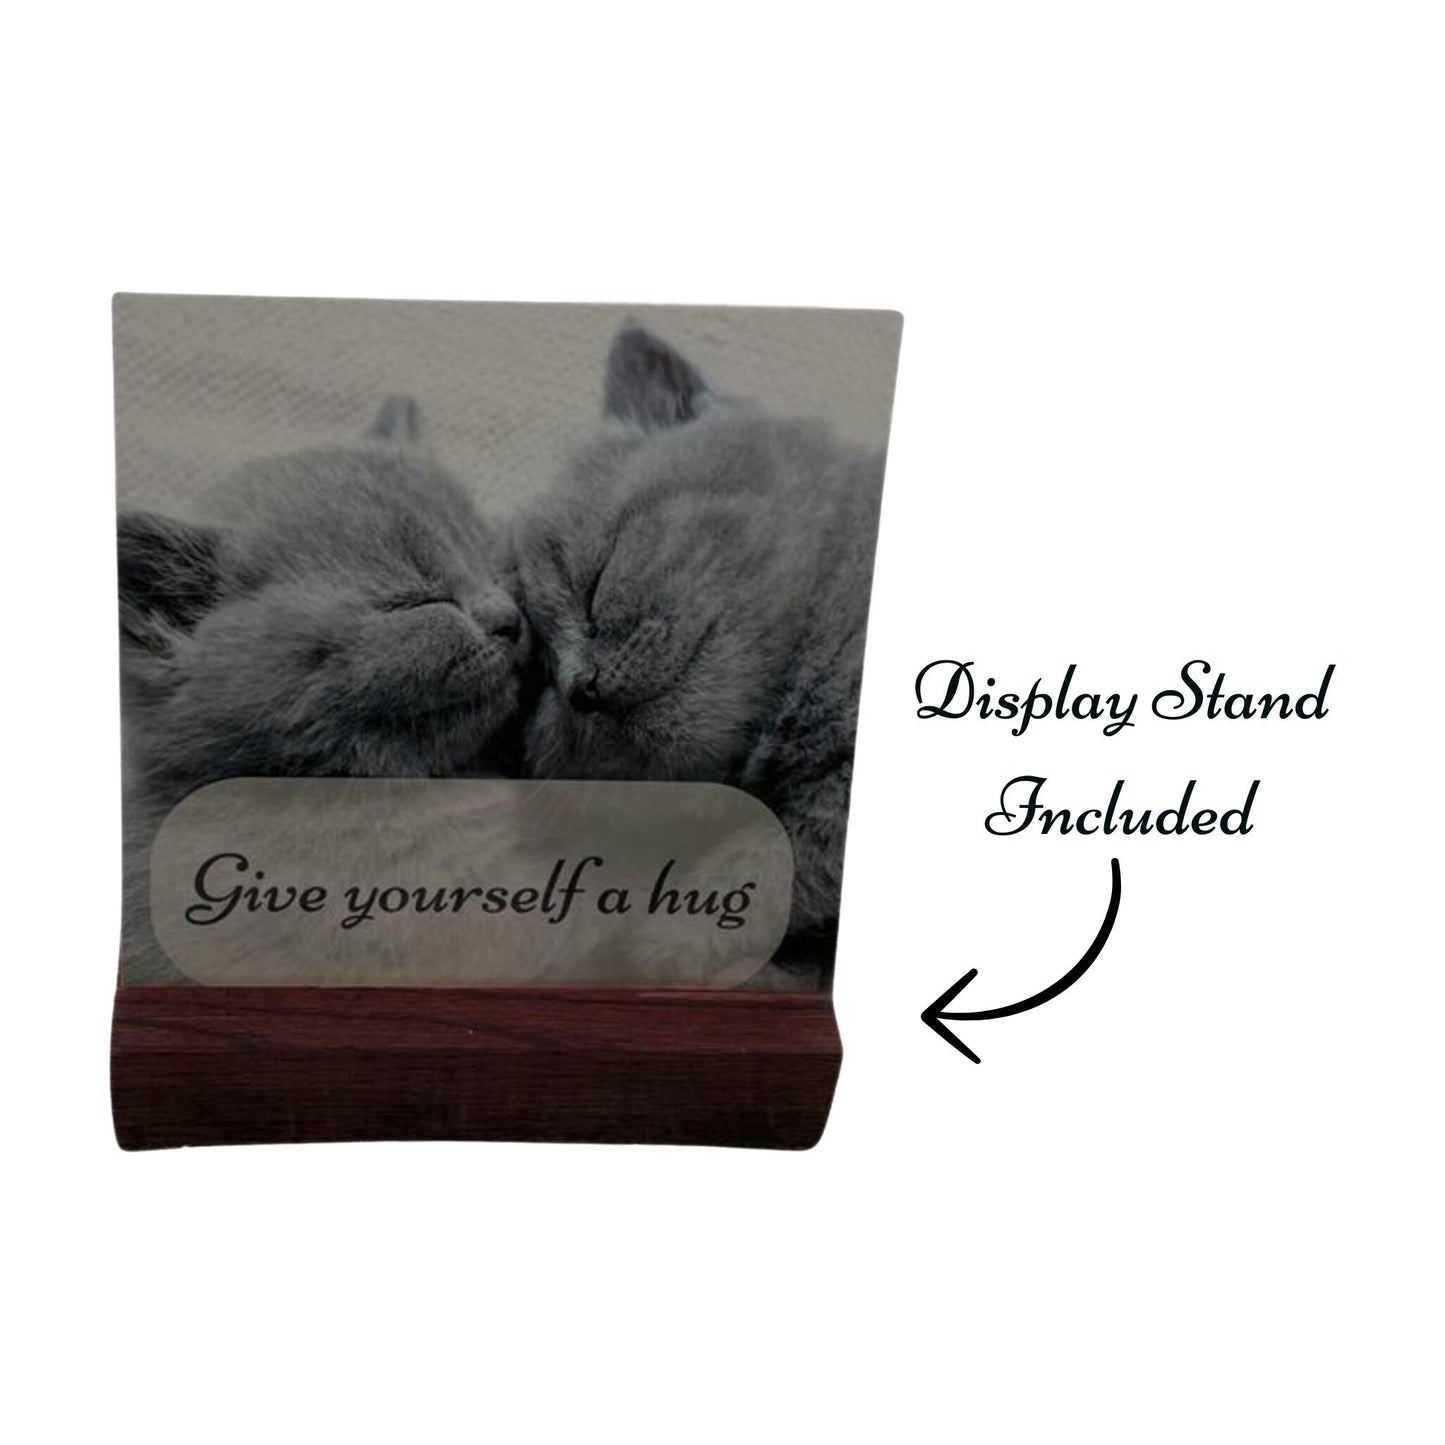 BUSINESS Comfort Card Gift Sets for Loved Ones and Pet Loss (12 Sets)